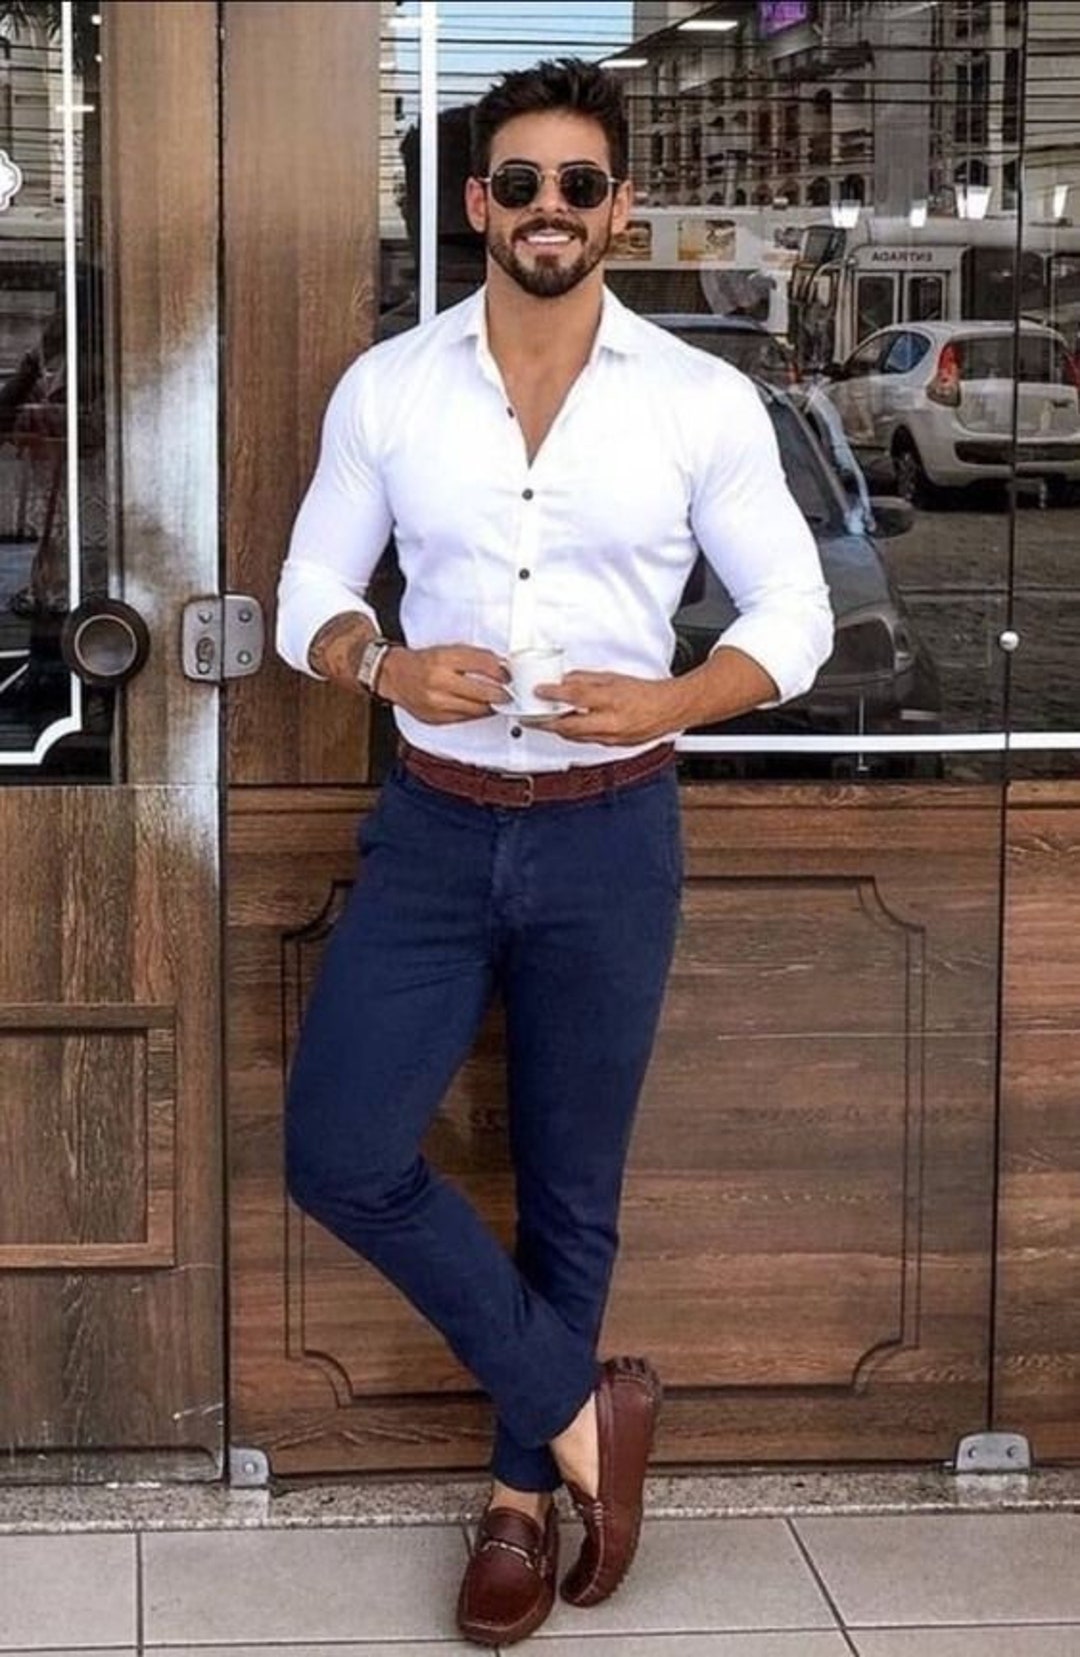 Dark Red & Maroon Pants For Guy's With Shirts Combination Outfits Ideas  2022 | Red pants men, Red pants outfit, Mens casual outfits summer